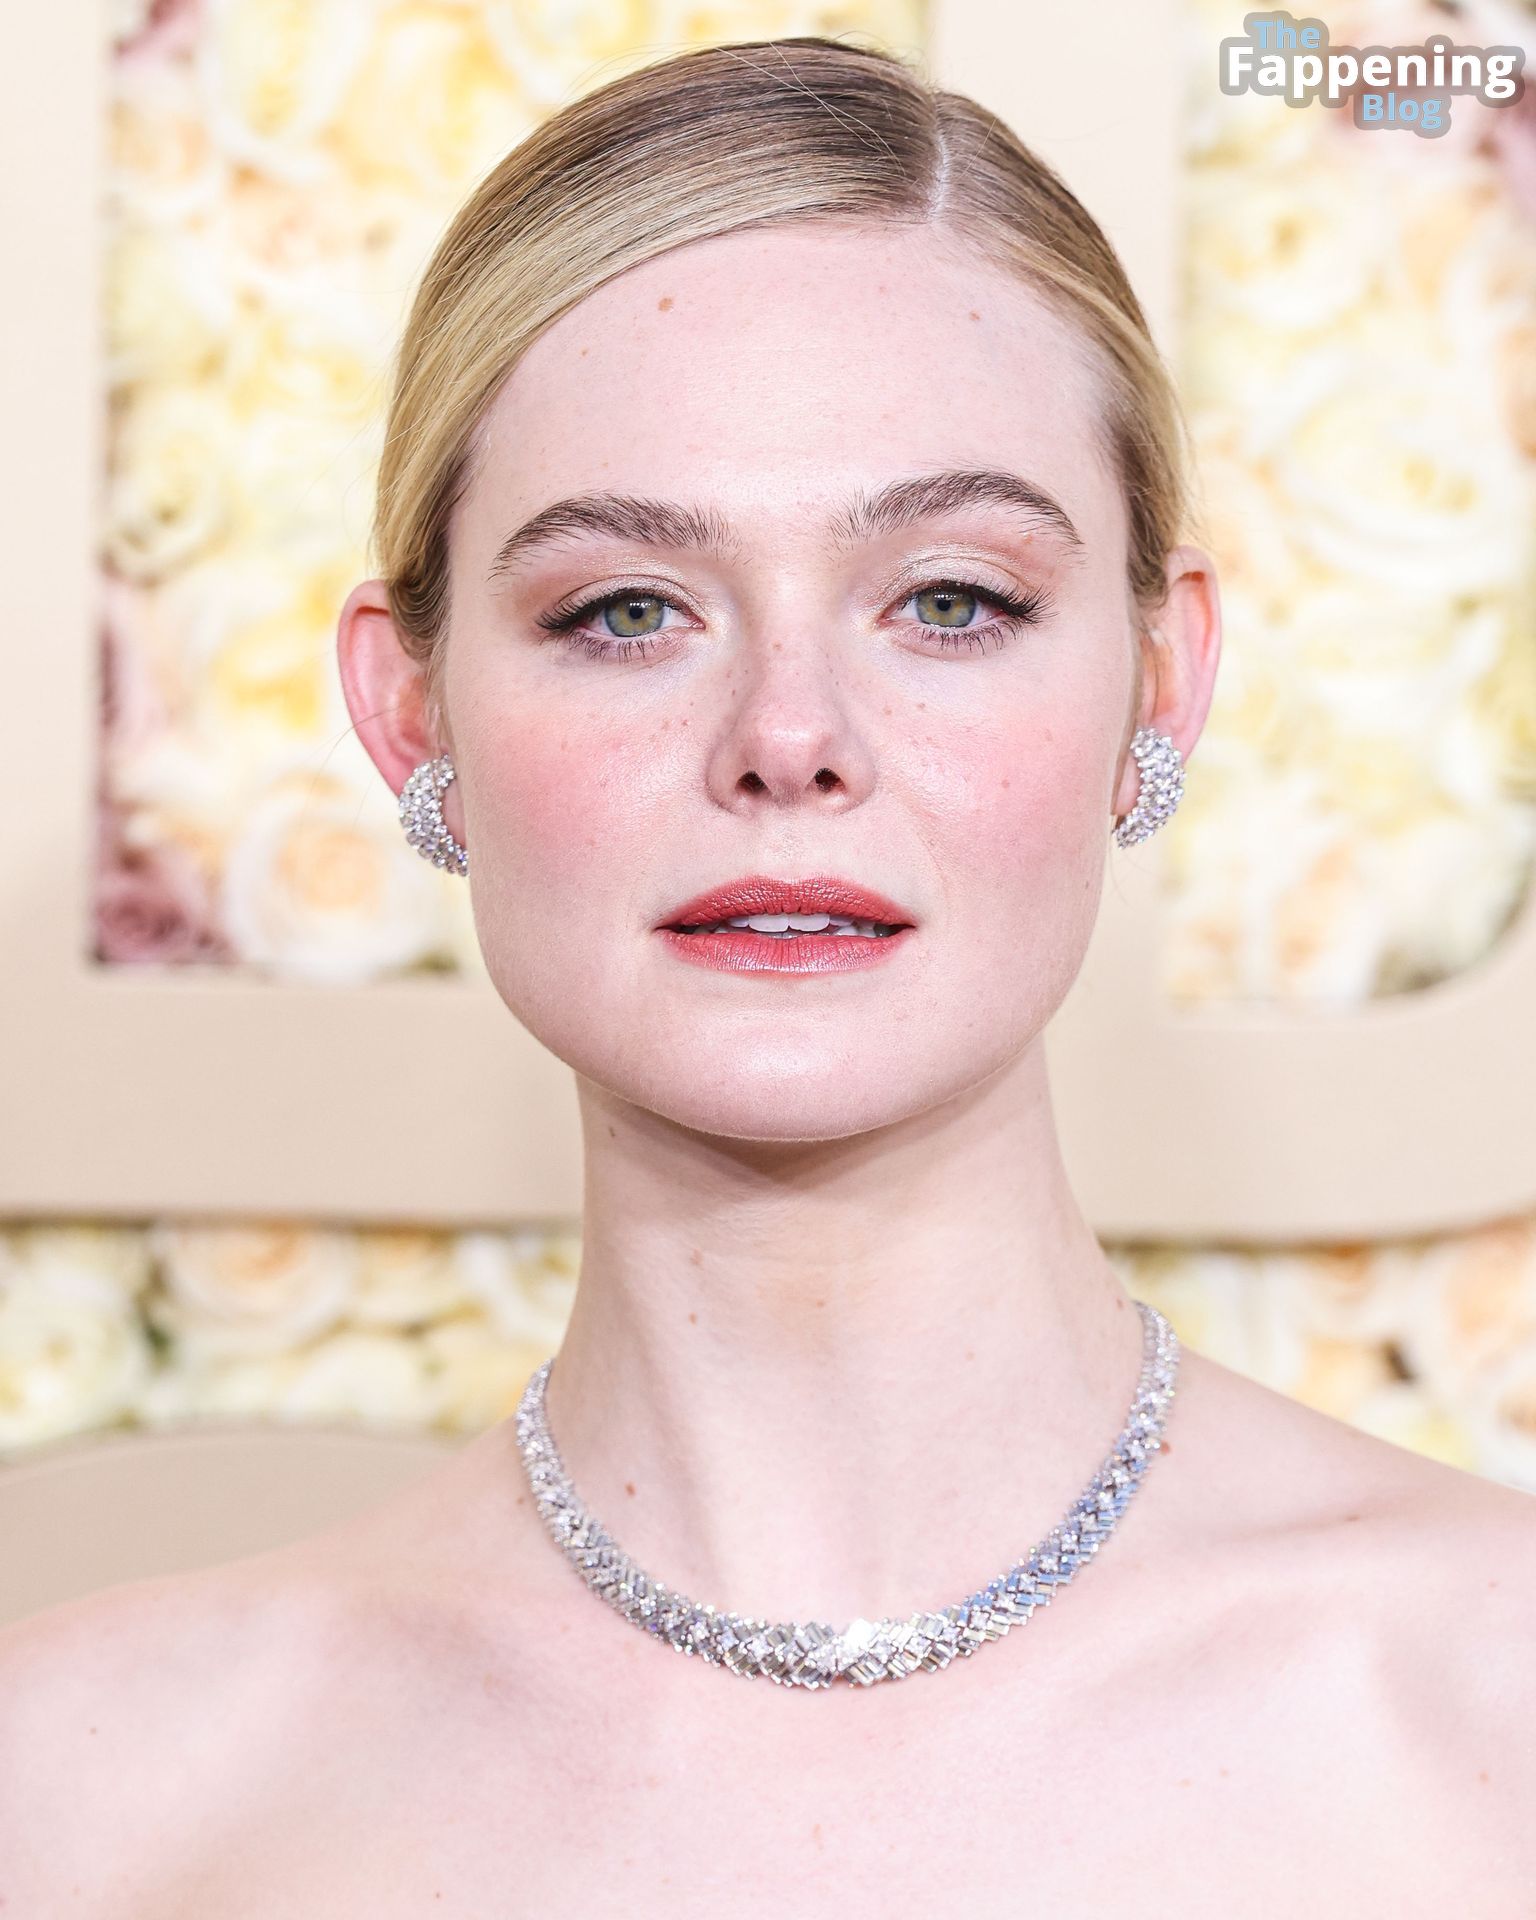 Elle-Fanning-Sexy-48-The-Fappening-Blog.jpg